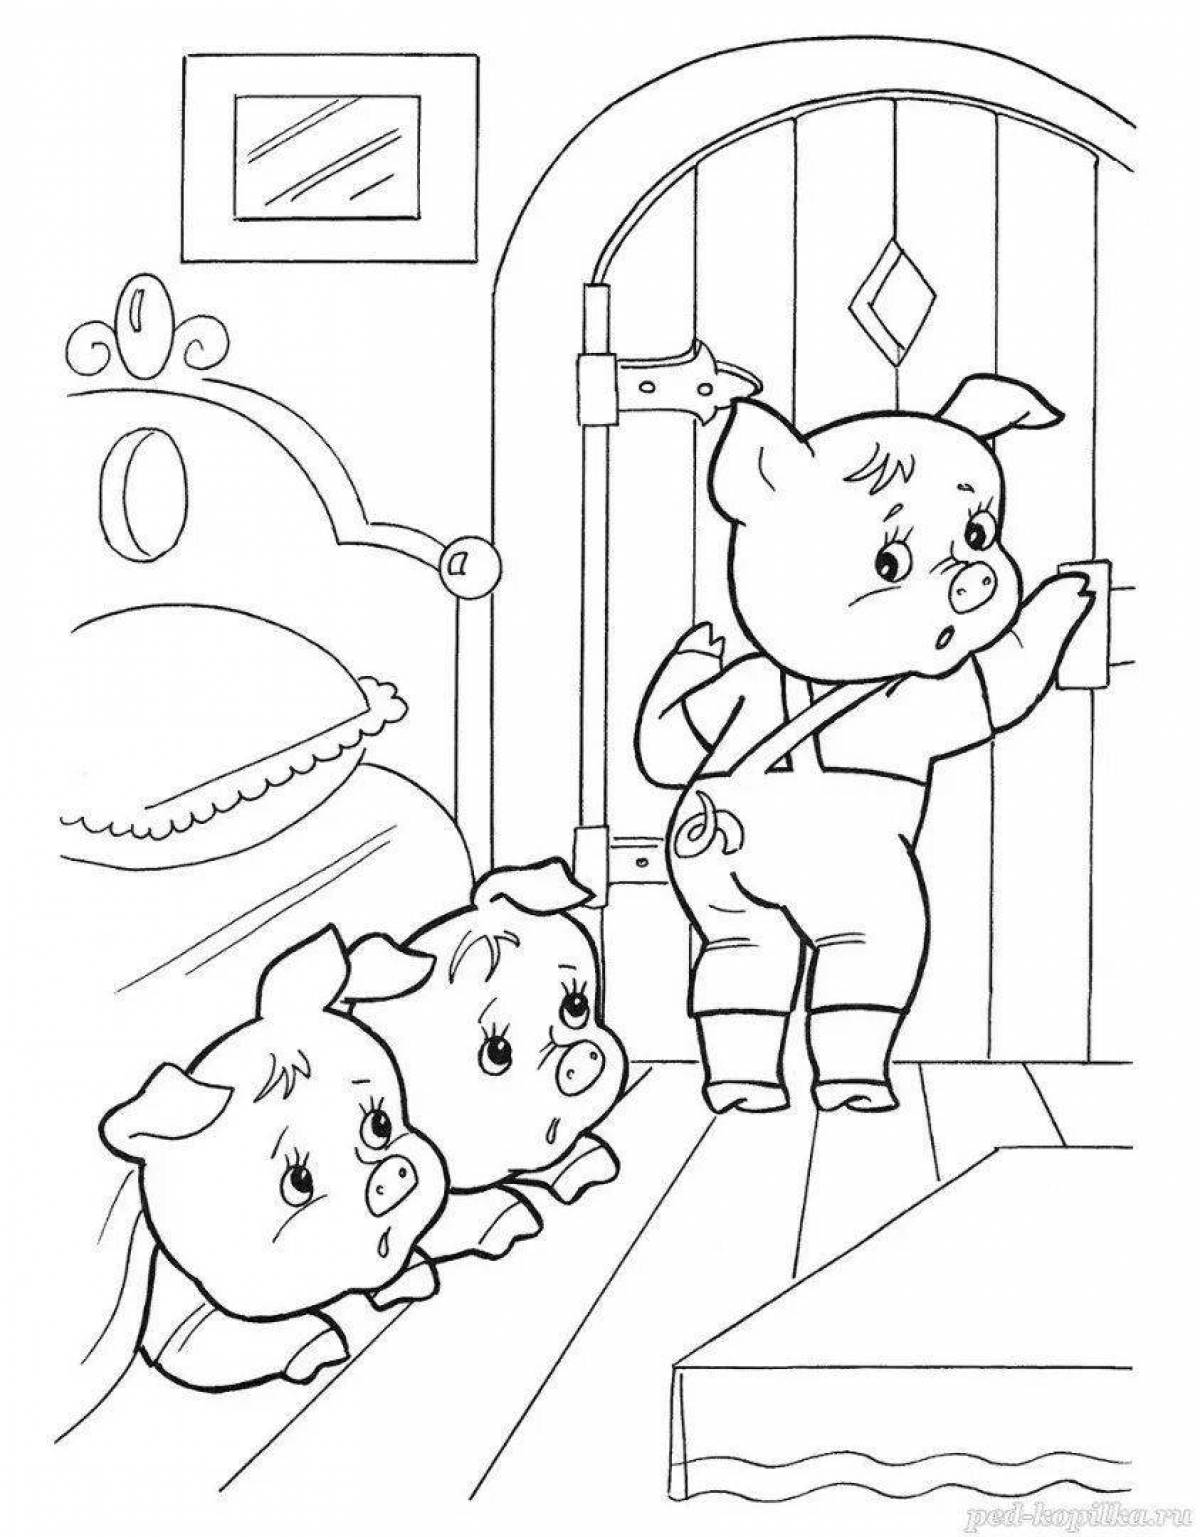 3 little pigs coloring book